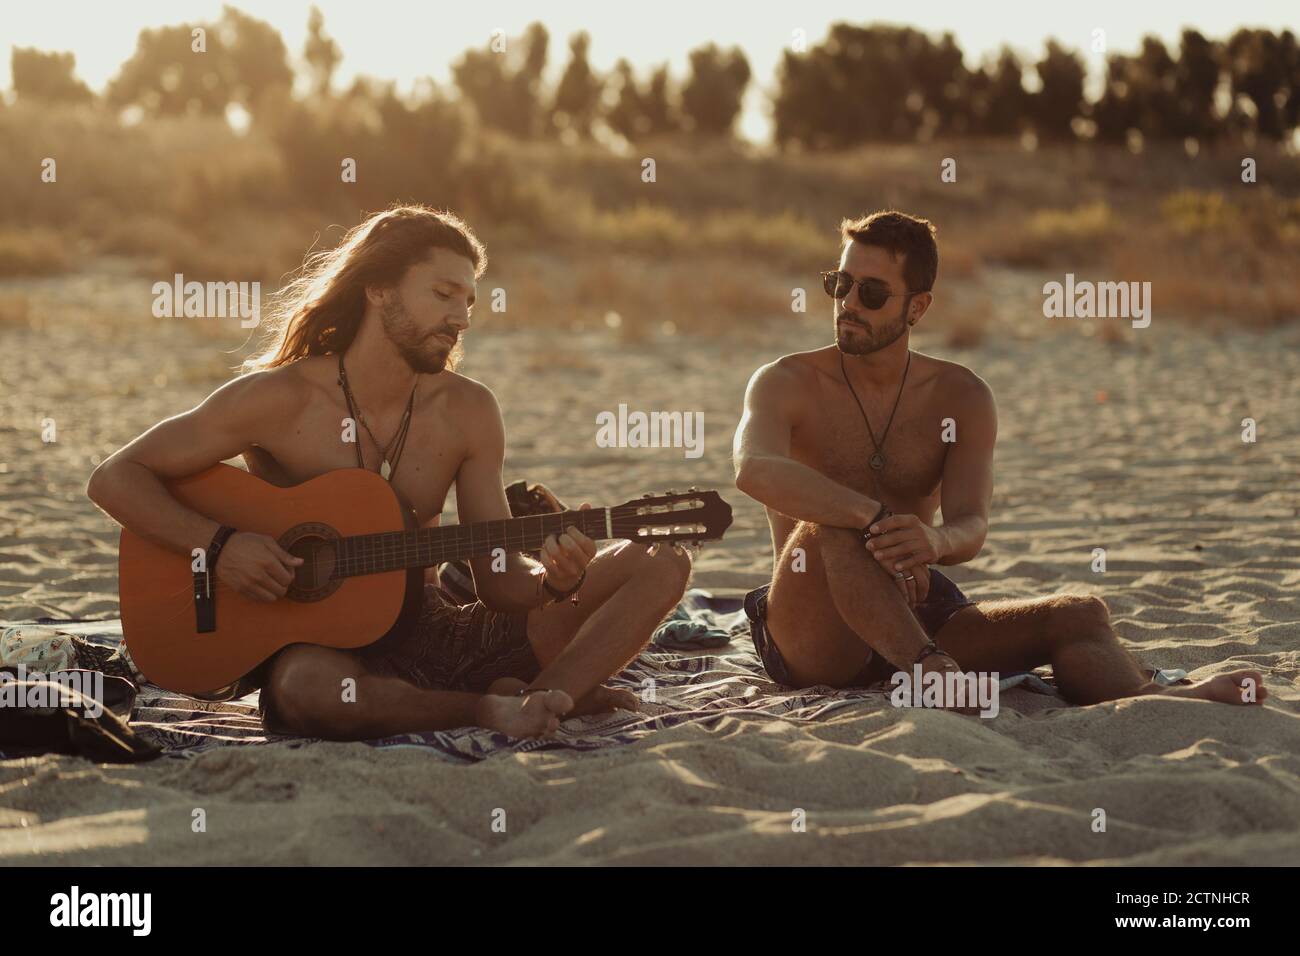 Relaxed talented man playing acoustic guitar for male friend while sitting together on sandy beach at sunset Stock Photo